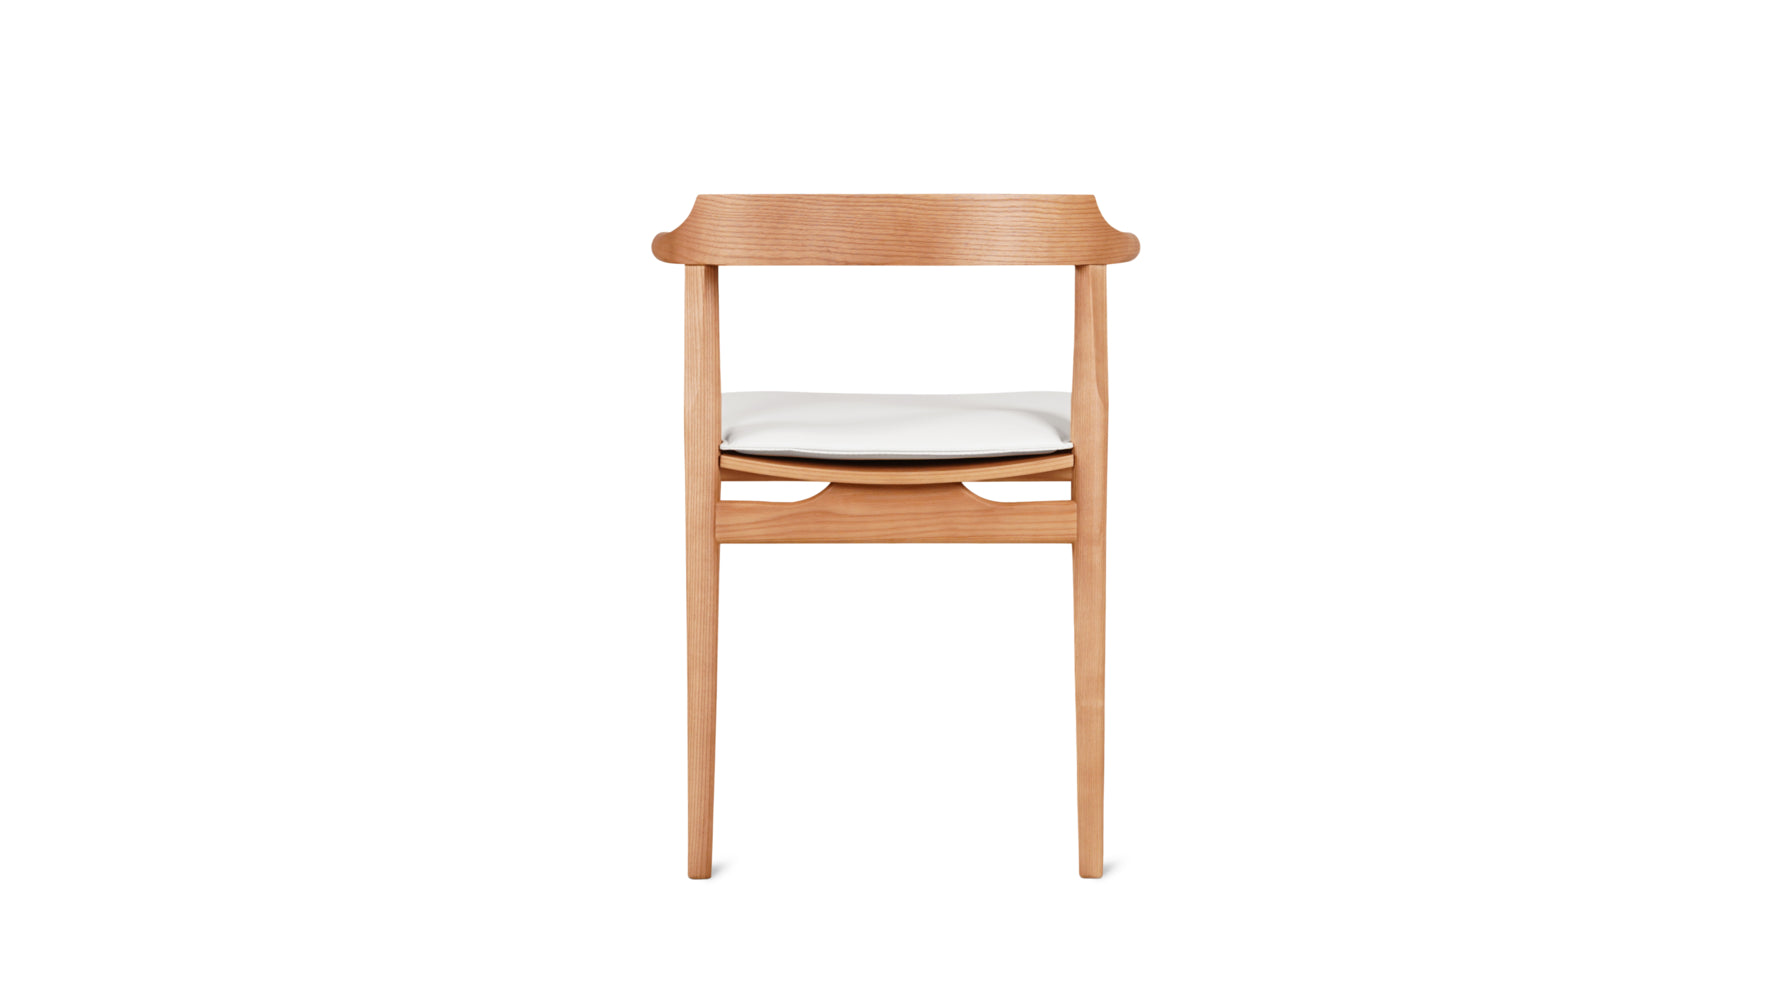 Tuck In Dining Chair with Cushion, White Oak, Wood Seat with White Cushion - Image 6